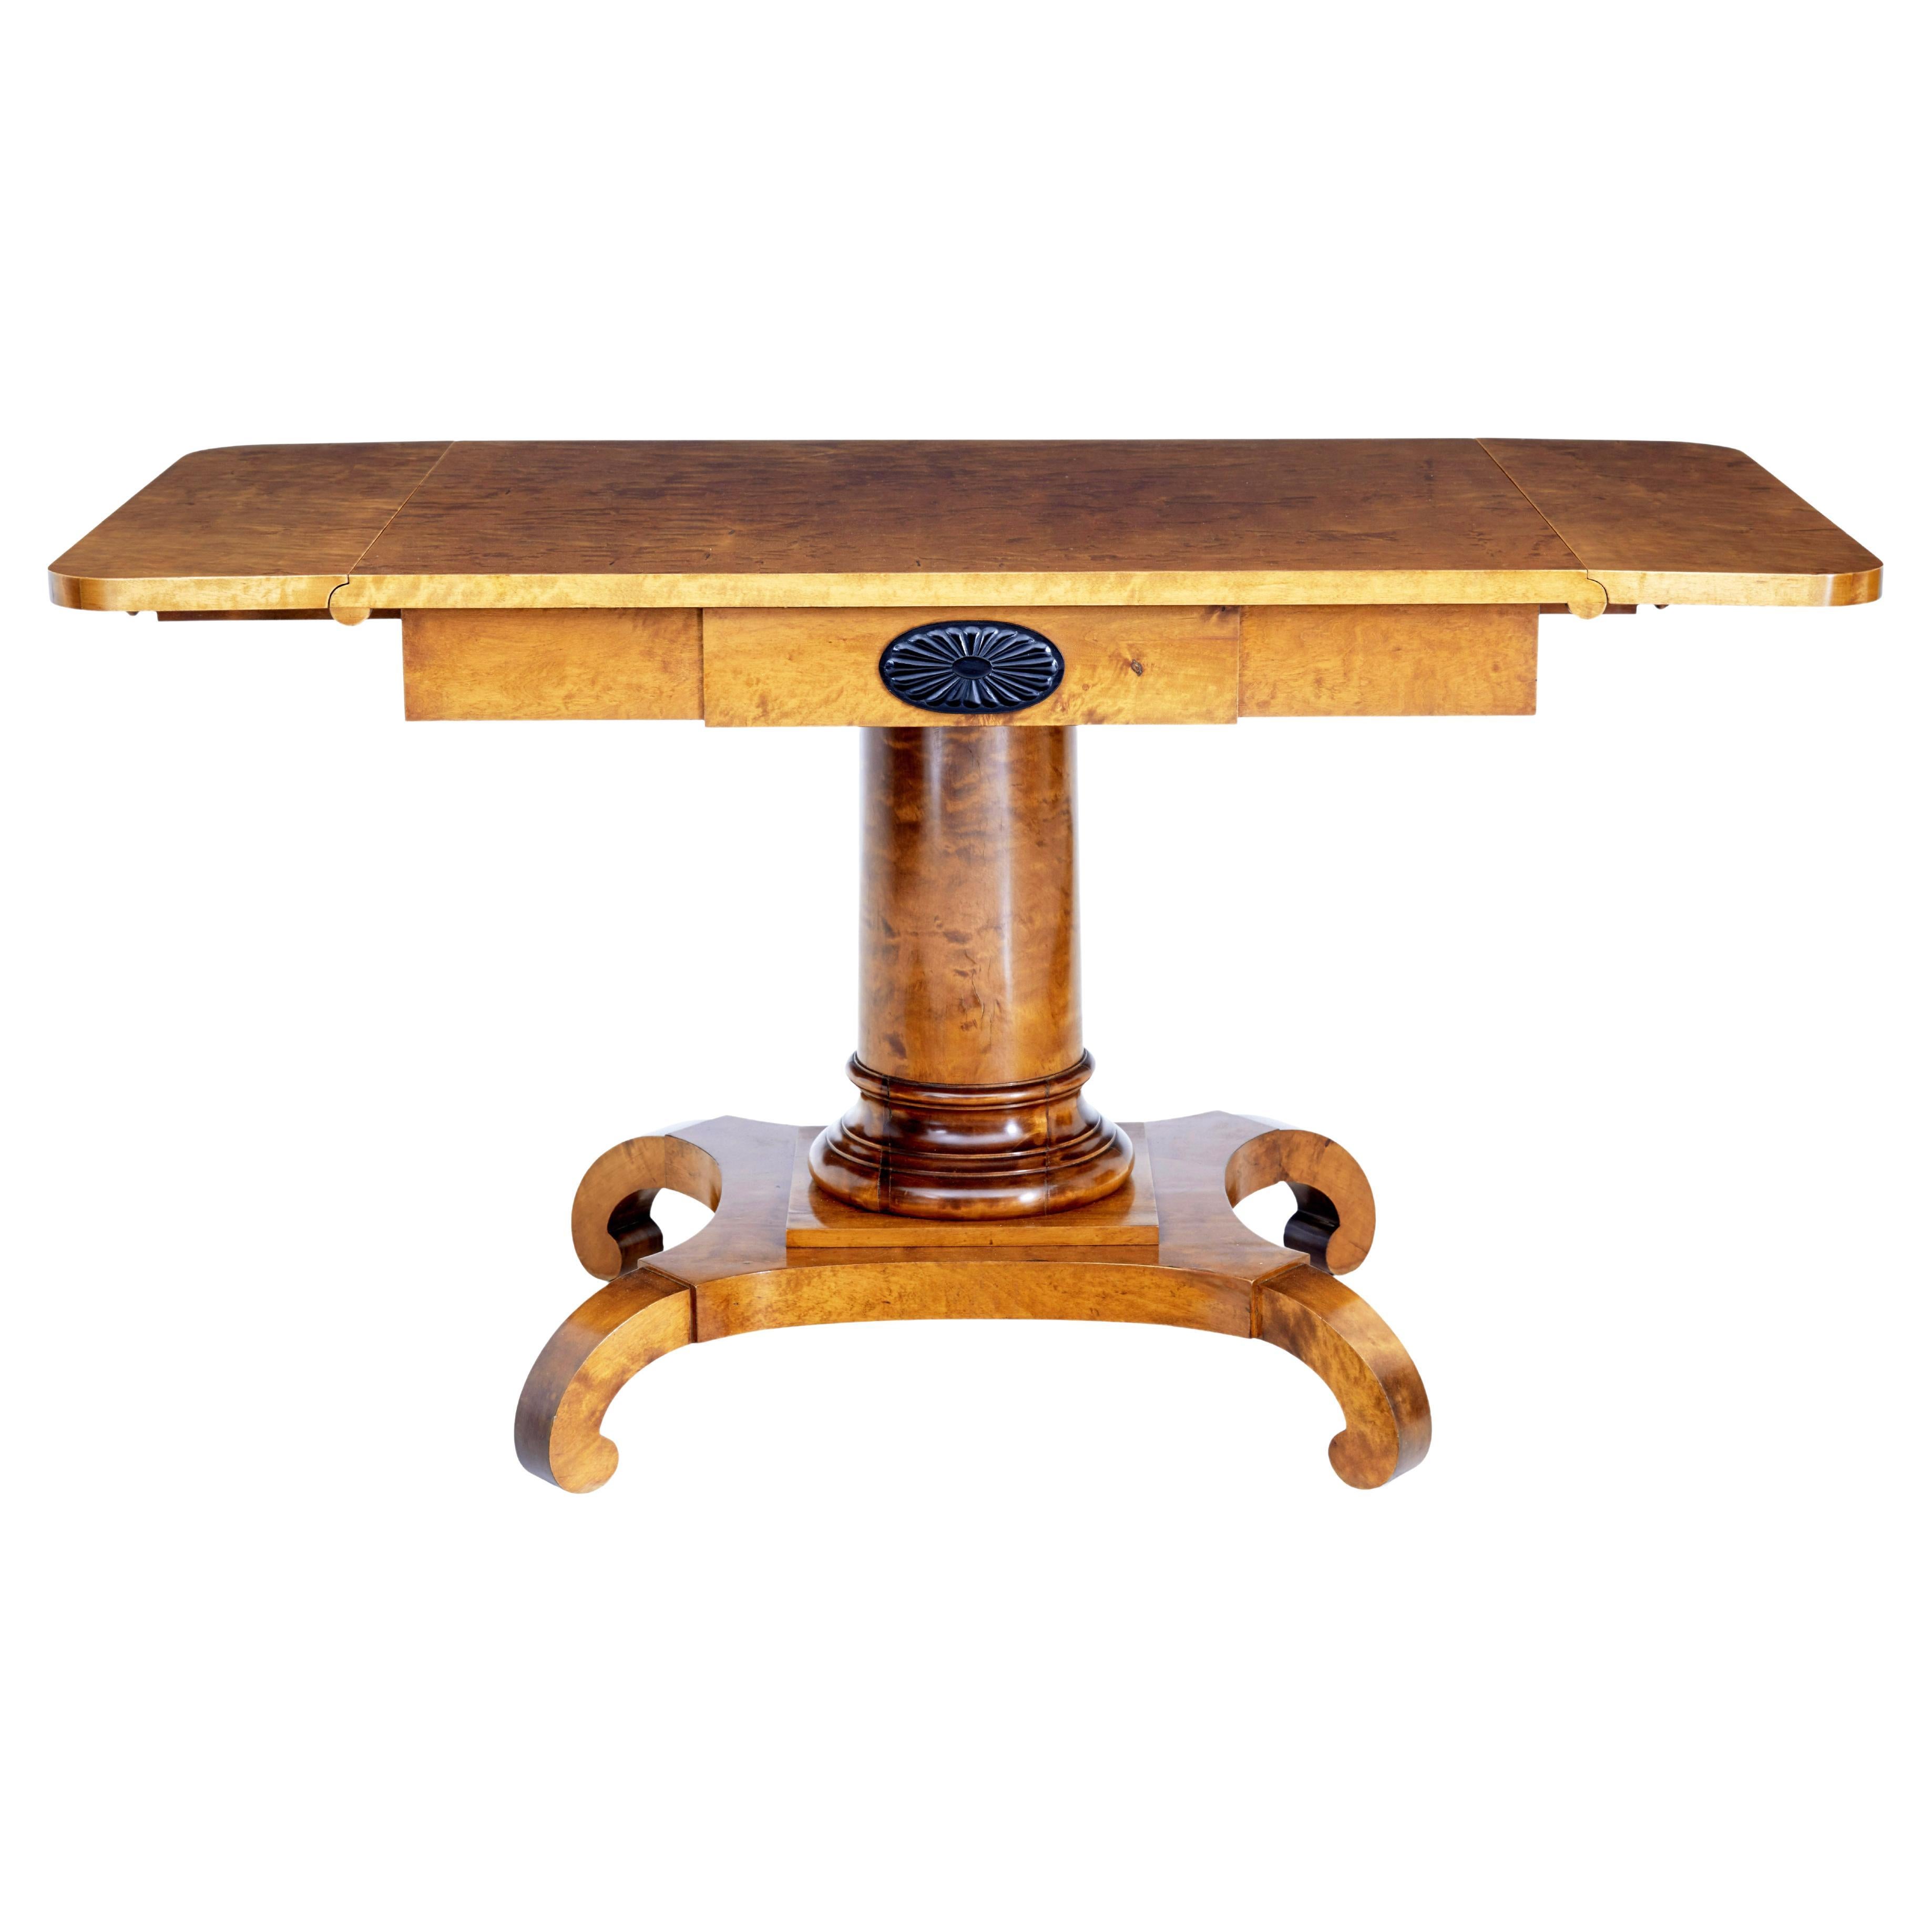 Early 20th century empire revival birch sofa table For Sale